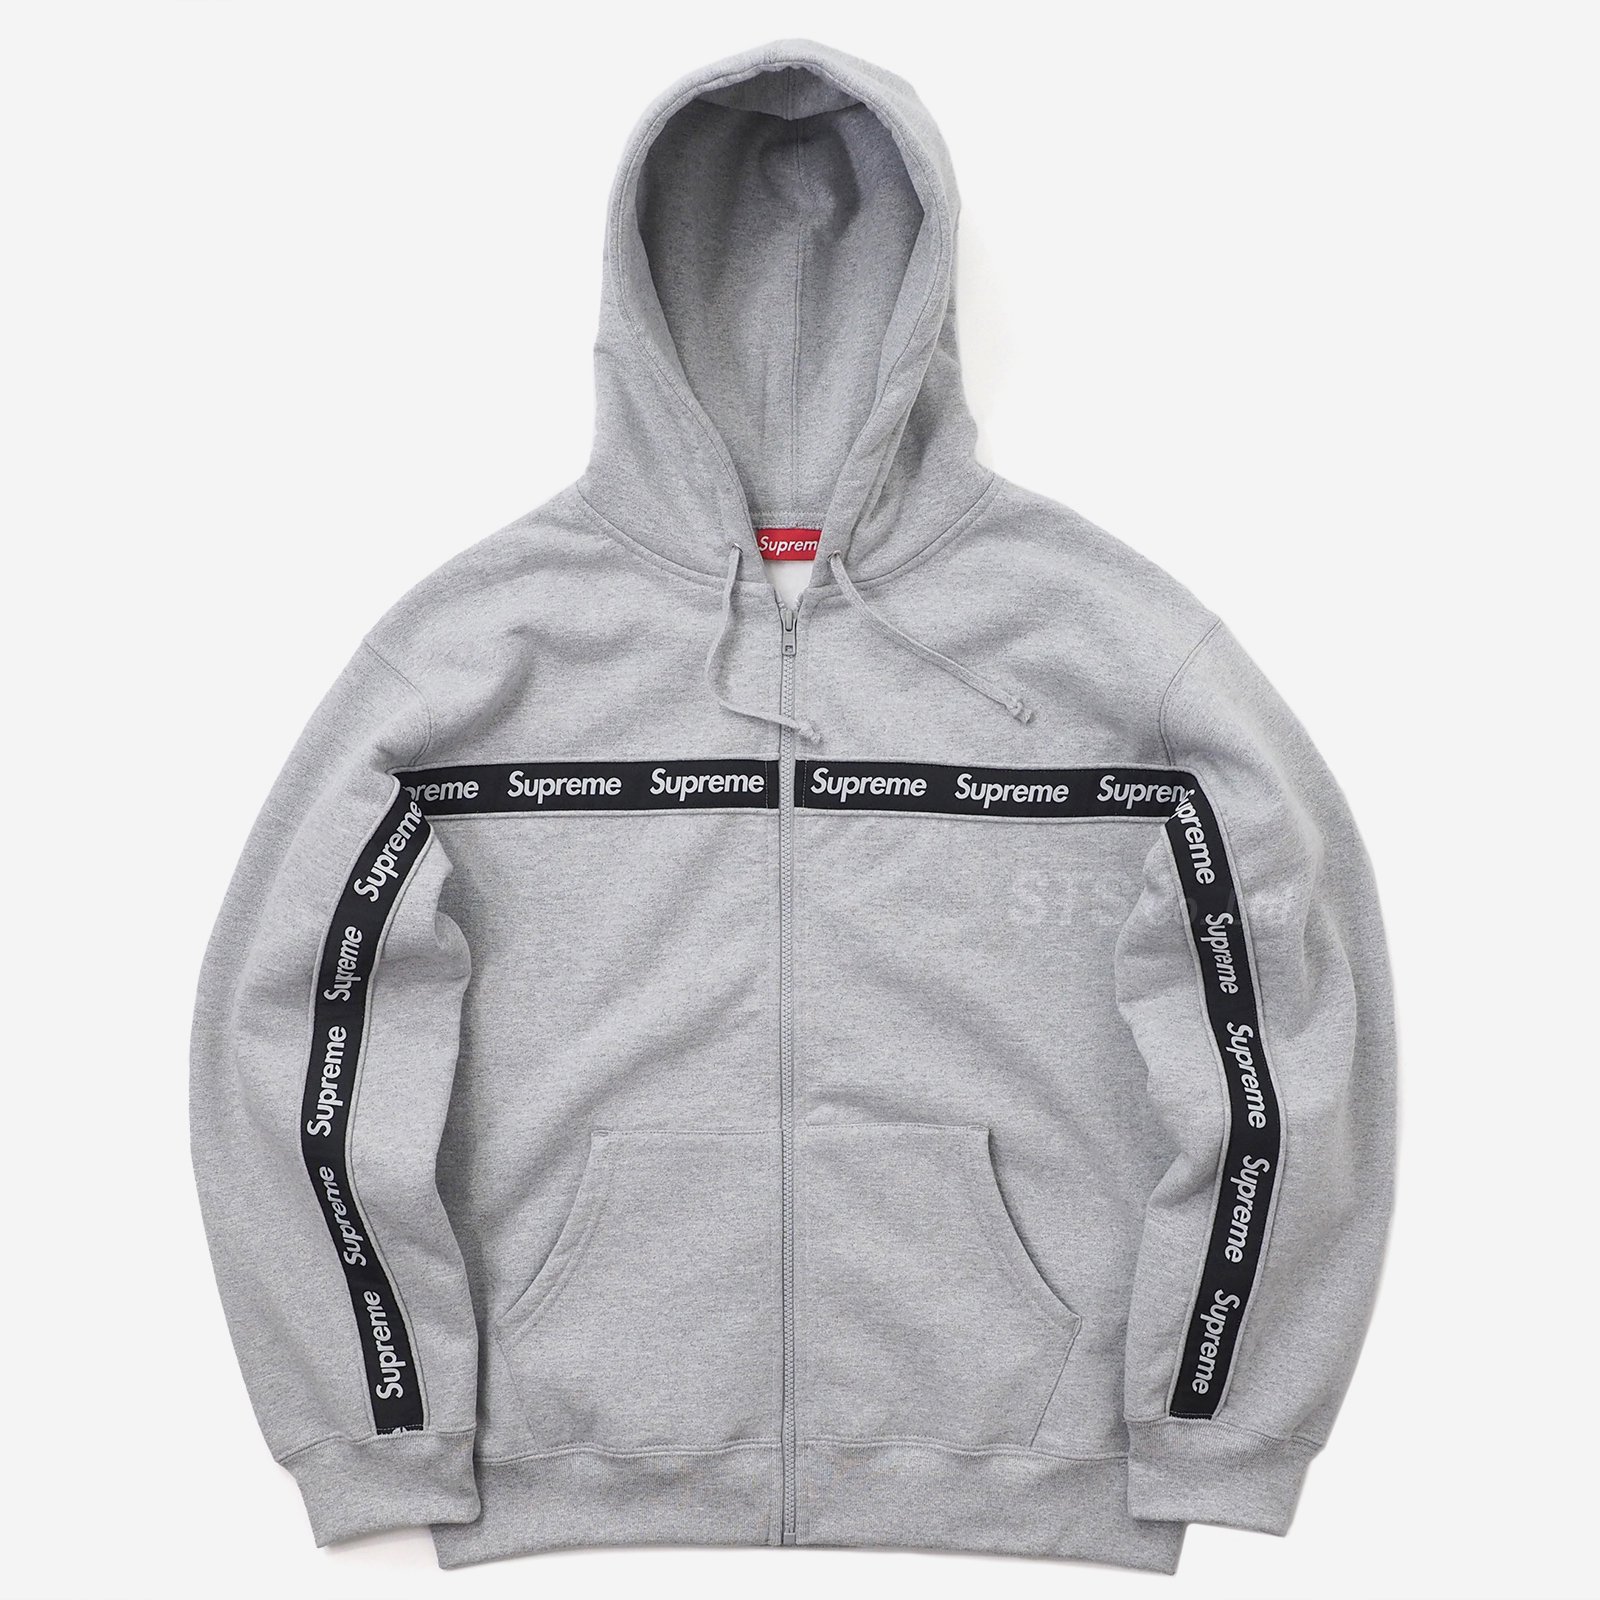 supreme®︎ / Text Stripe Zip Up Hooded